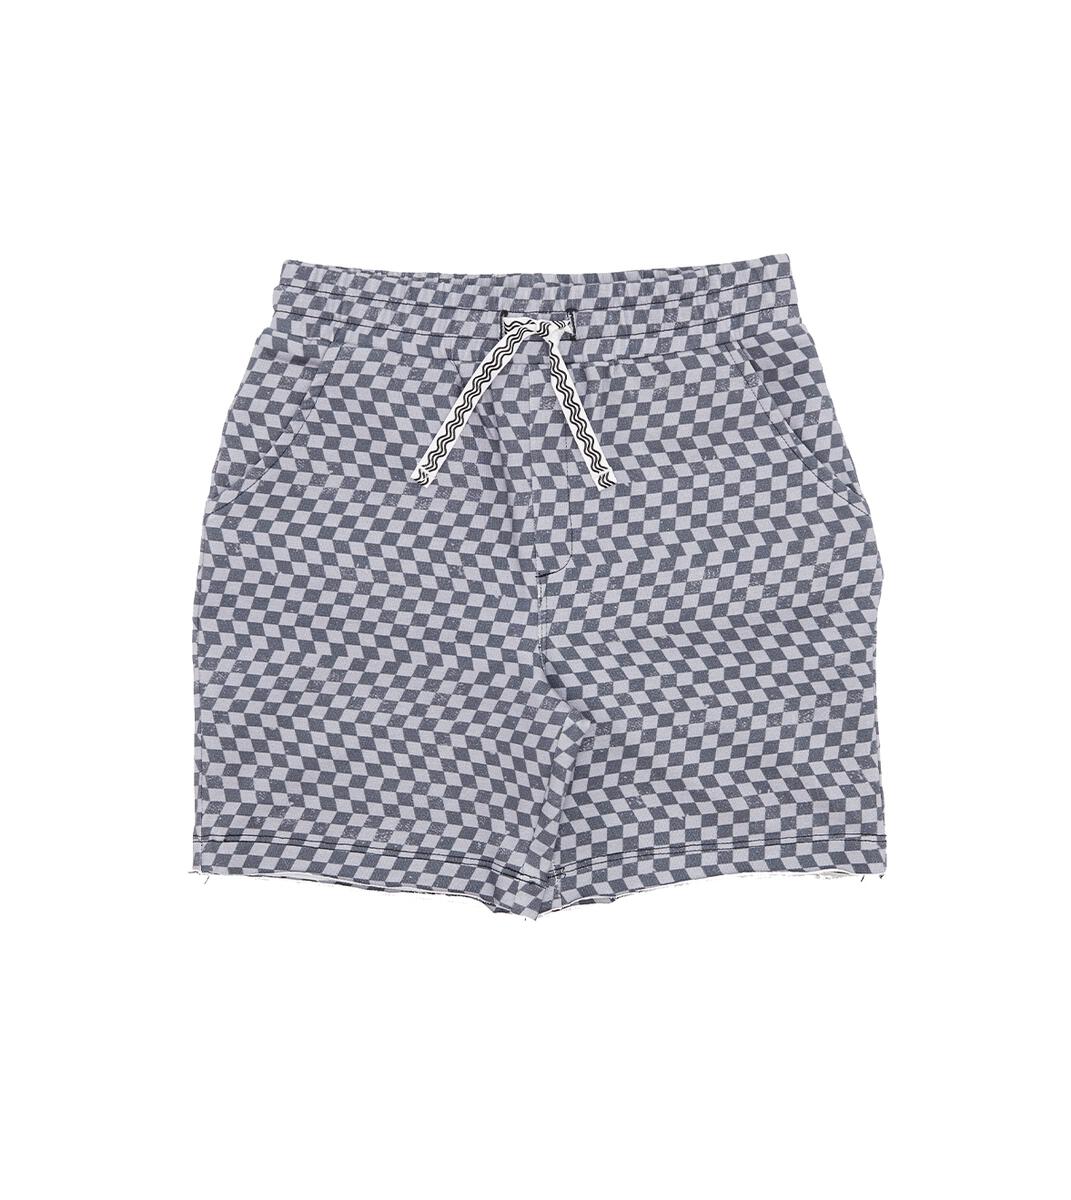 Feather 4 Arrow - Low Tide Black & White Check Shorts